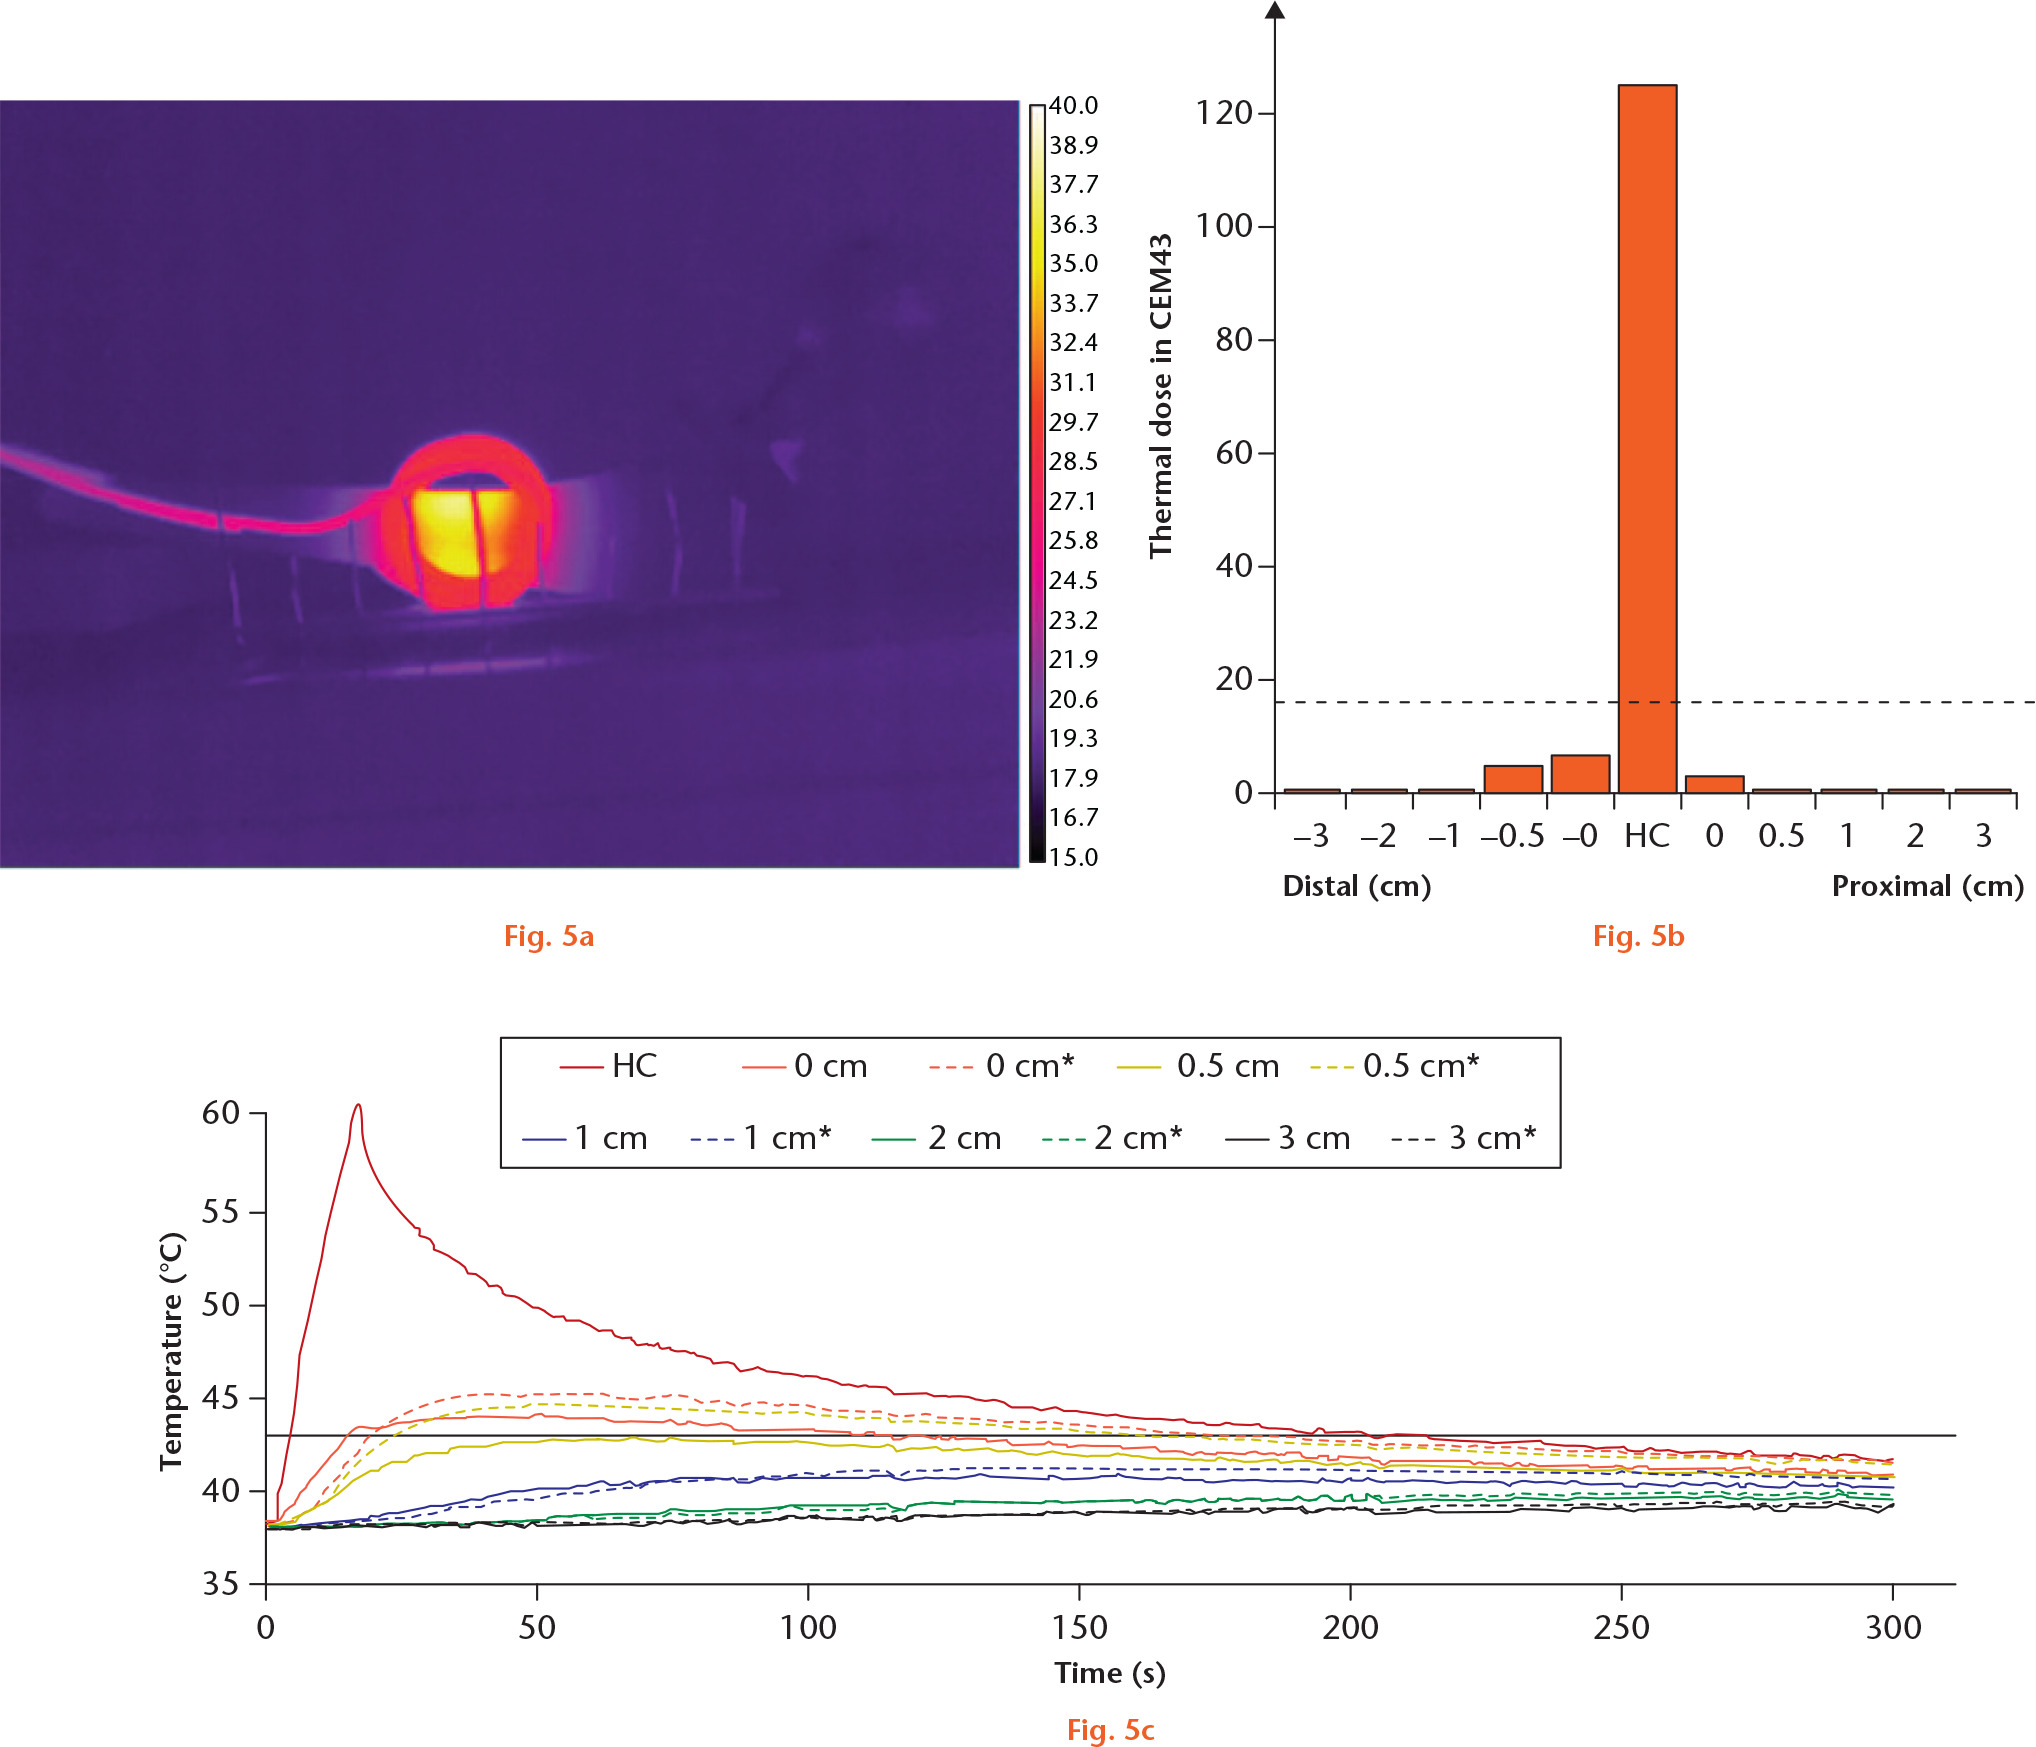  
            Segmental induction heating of hip stem centre. a) A thermal image from a thermal camera showing selective heating. The vertical lines have 1 cm spacing. b) A graph showing thermal dose in CEM43 at several distances from the heating centre (HC). The dashed line represents 16 CEM43, the threshold for necrosis of bone. c) A graph showing the temperature at several distances from the HC during the segmental induction heating and thereafter. Dashed lines indicate distal direction.
          